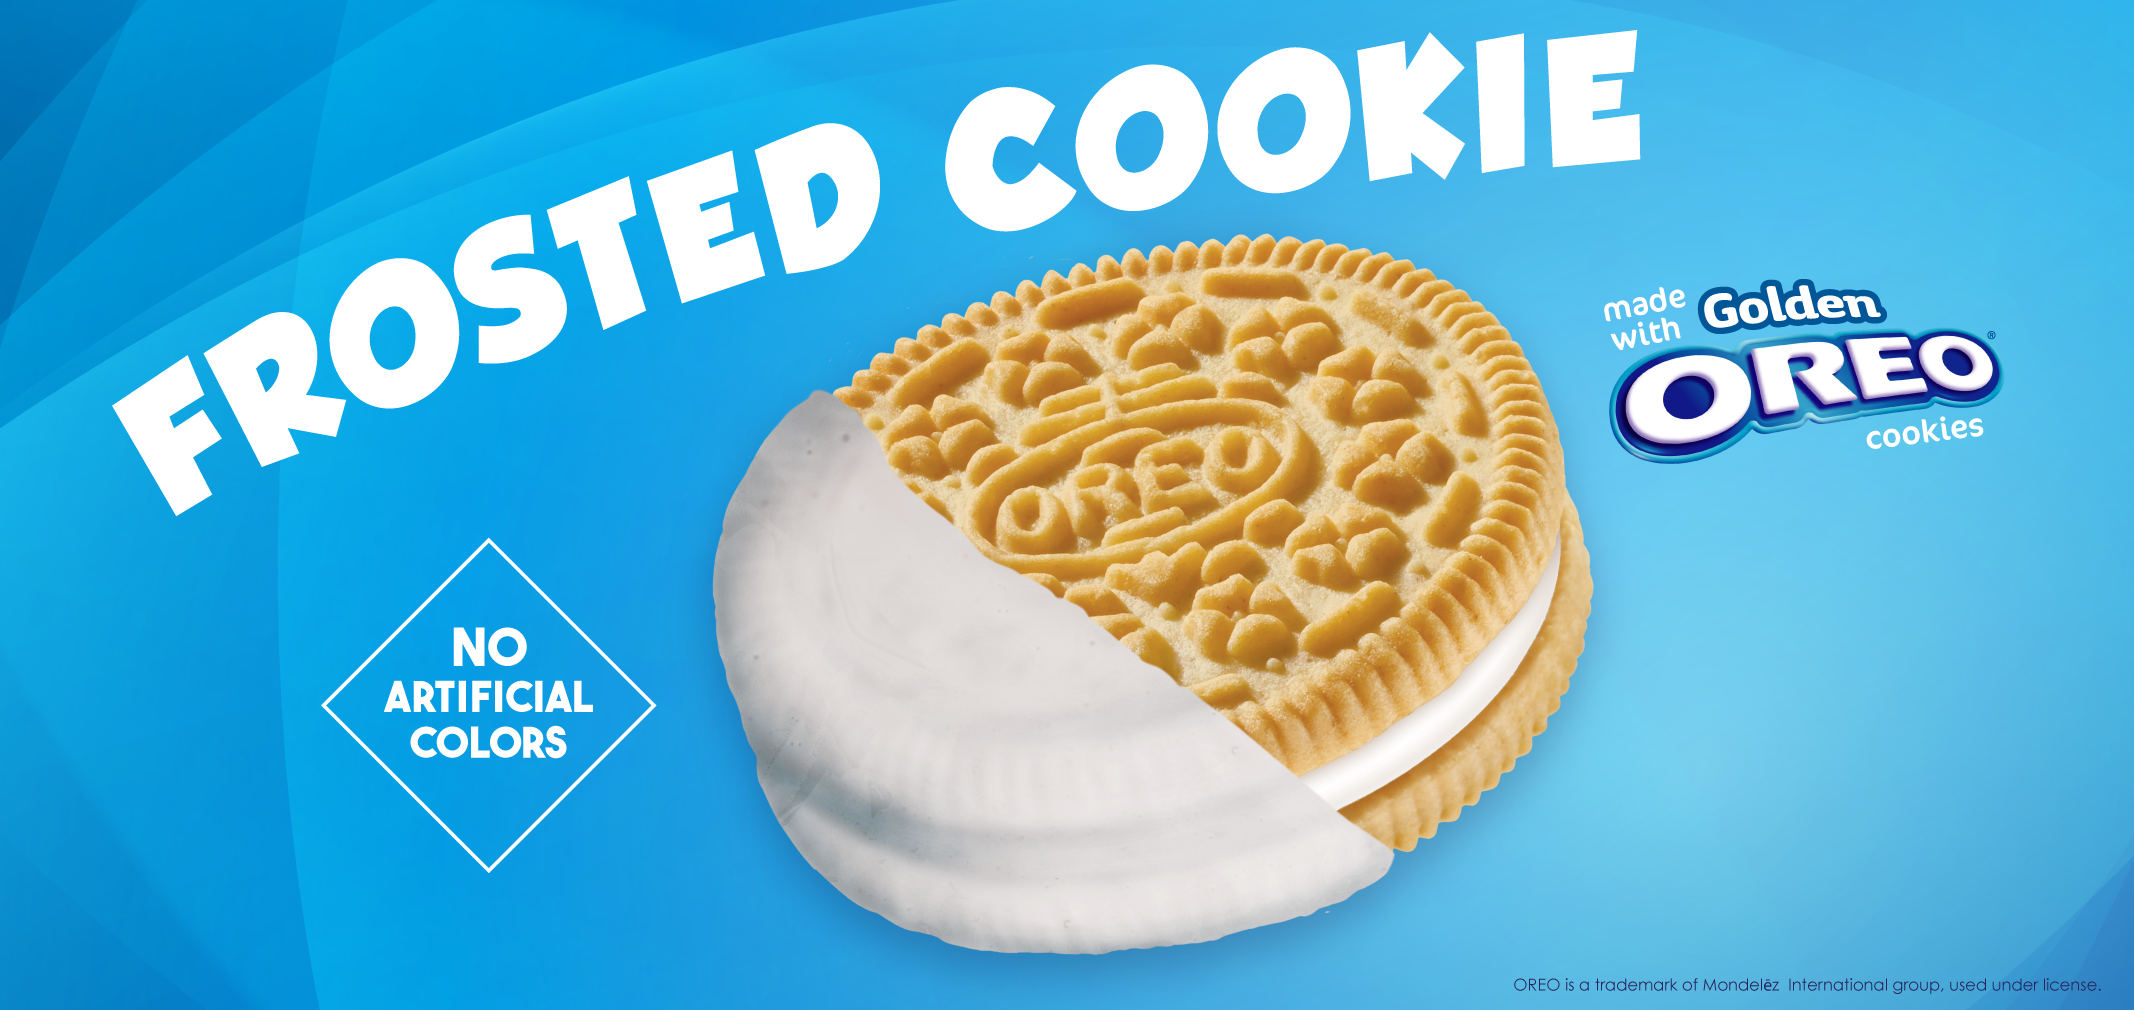 Frosted Cookie made with Golden Oreo Cookies label image